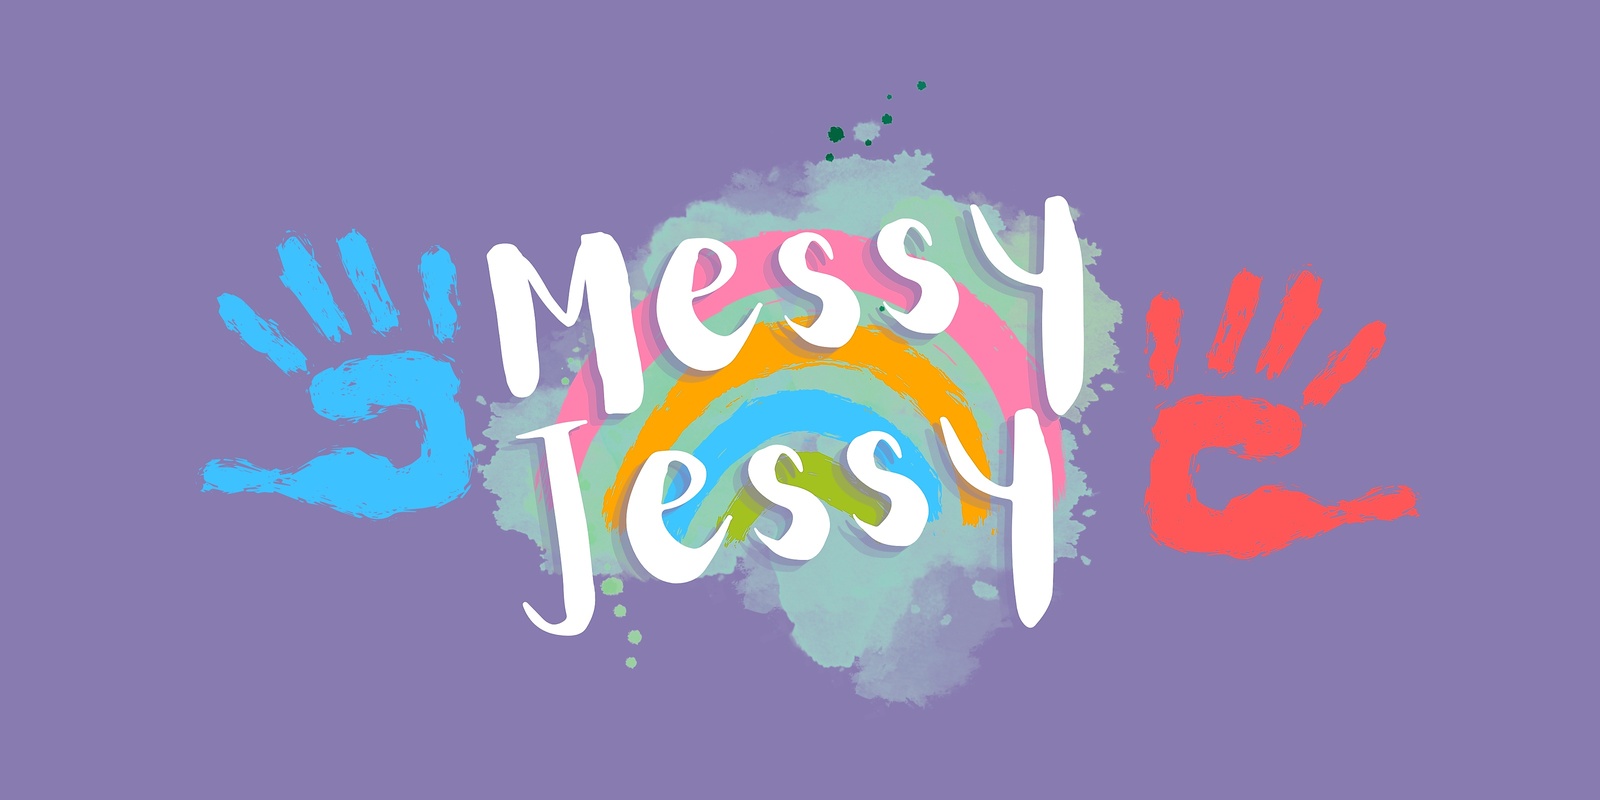 Banner image for Messy Jessy Sensory Wednesday 9AM